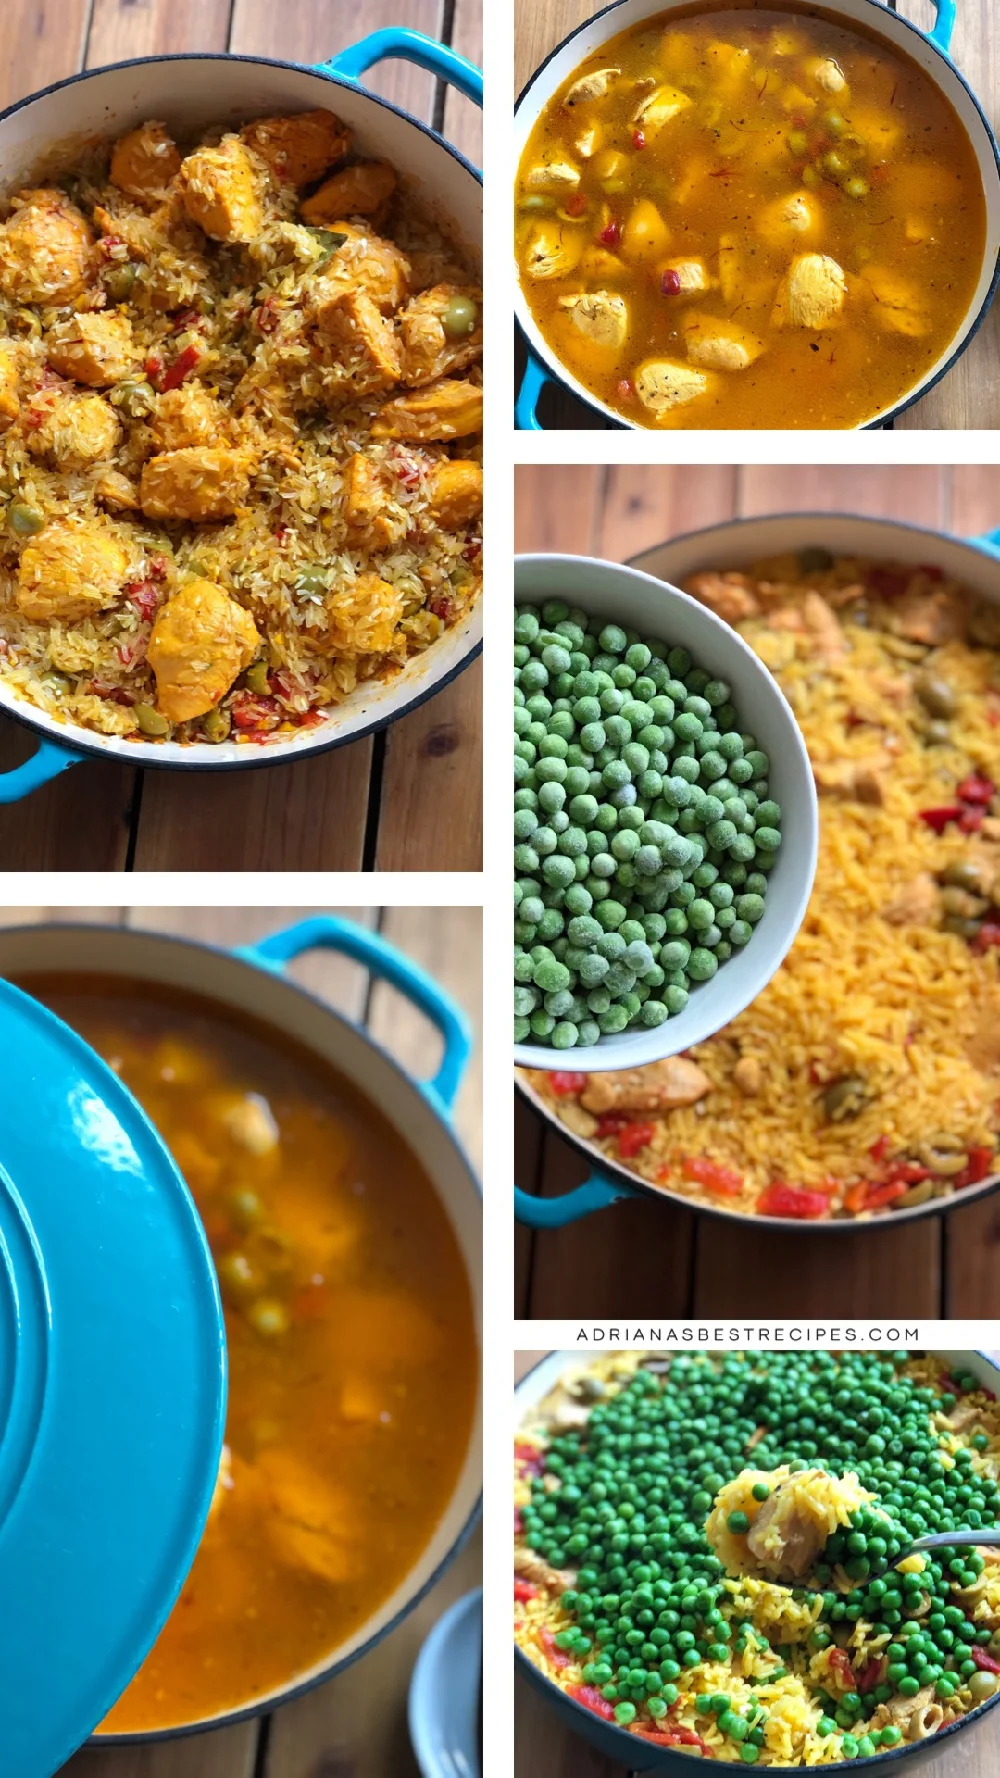 Step by step process on how to make the arroz con pollo using a dutch oven